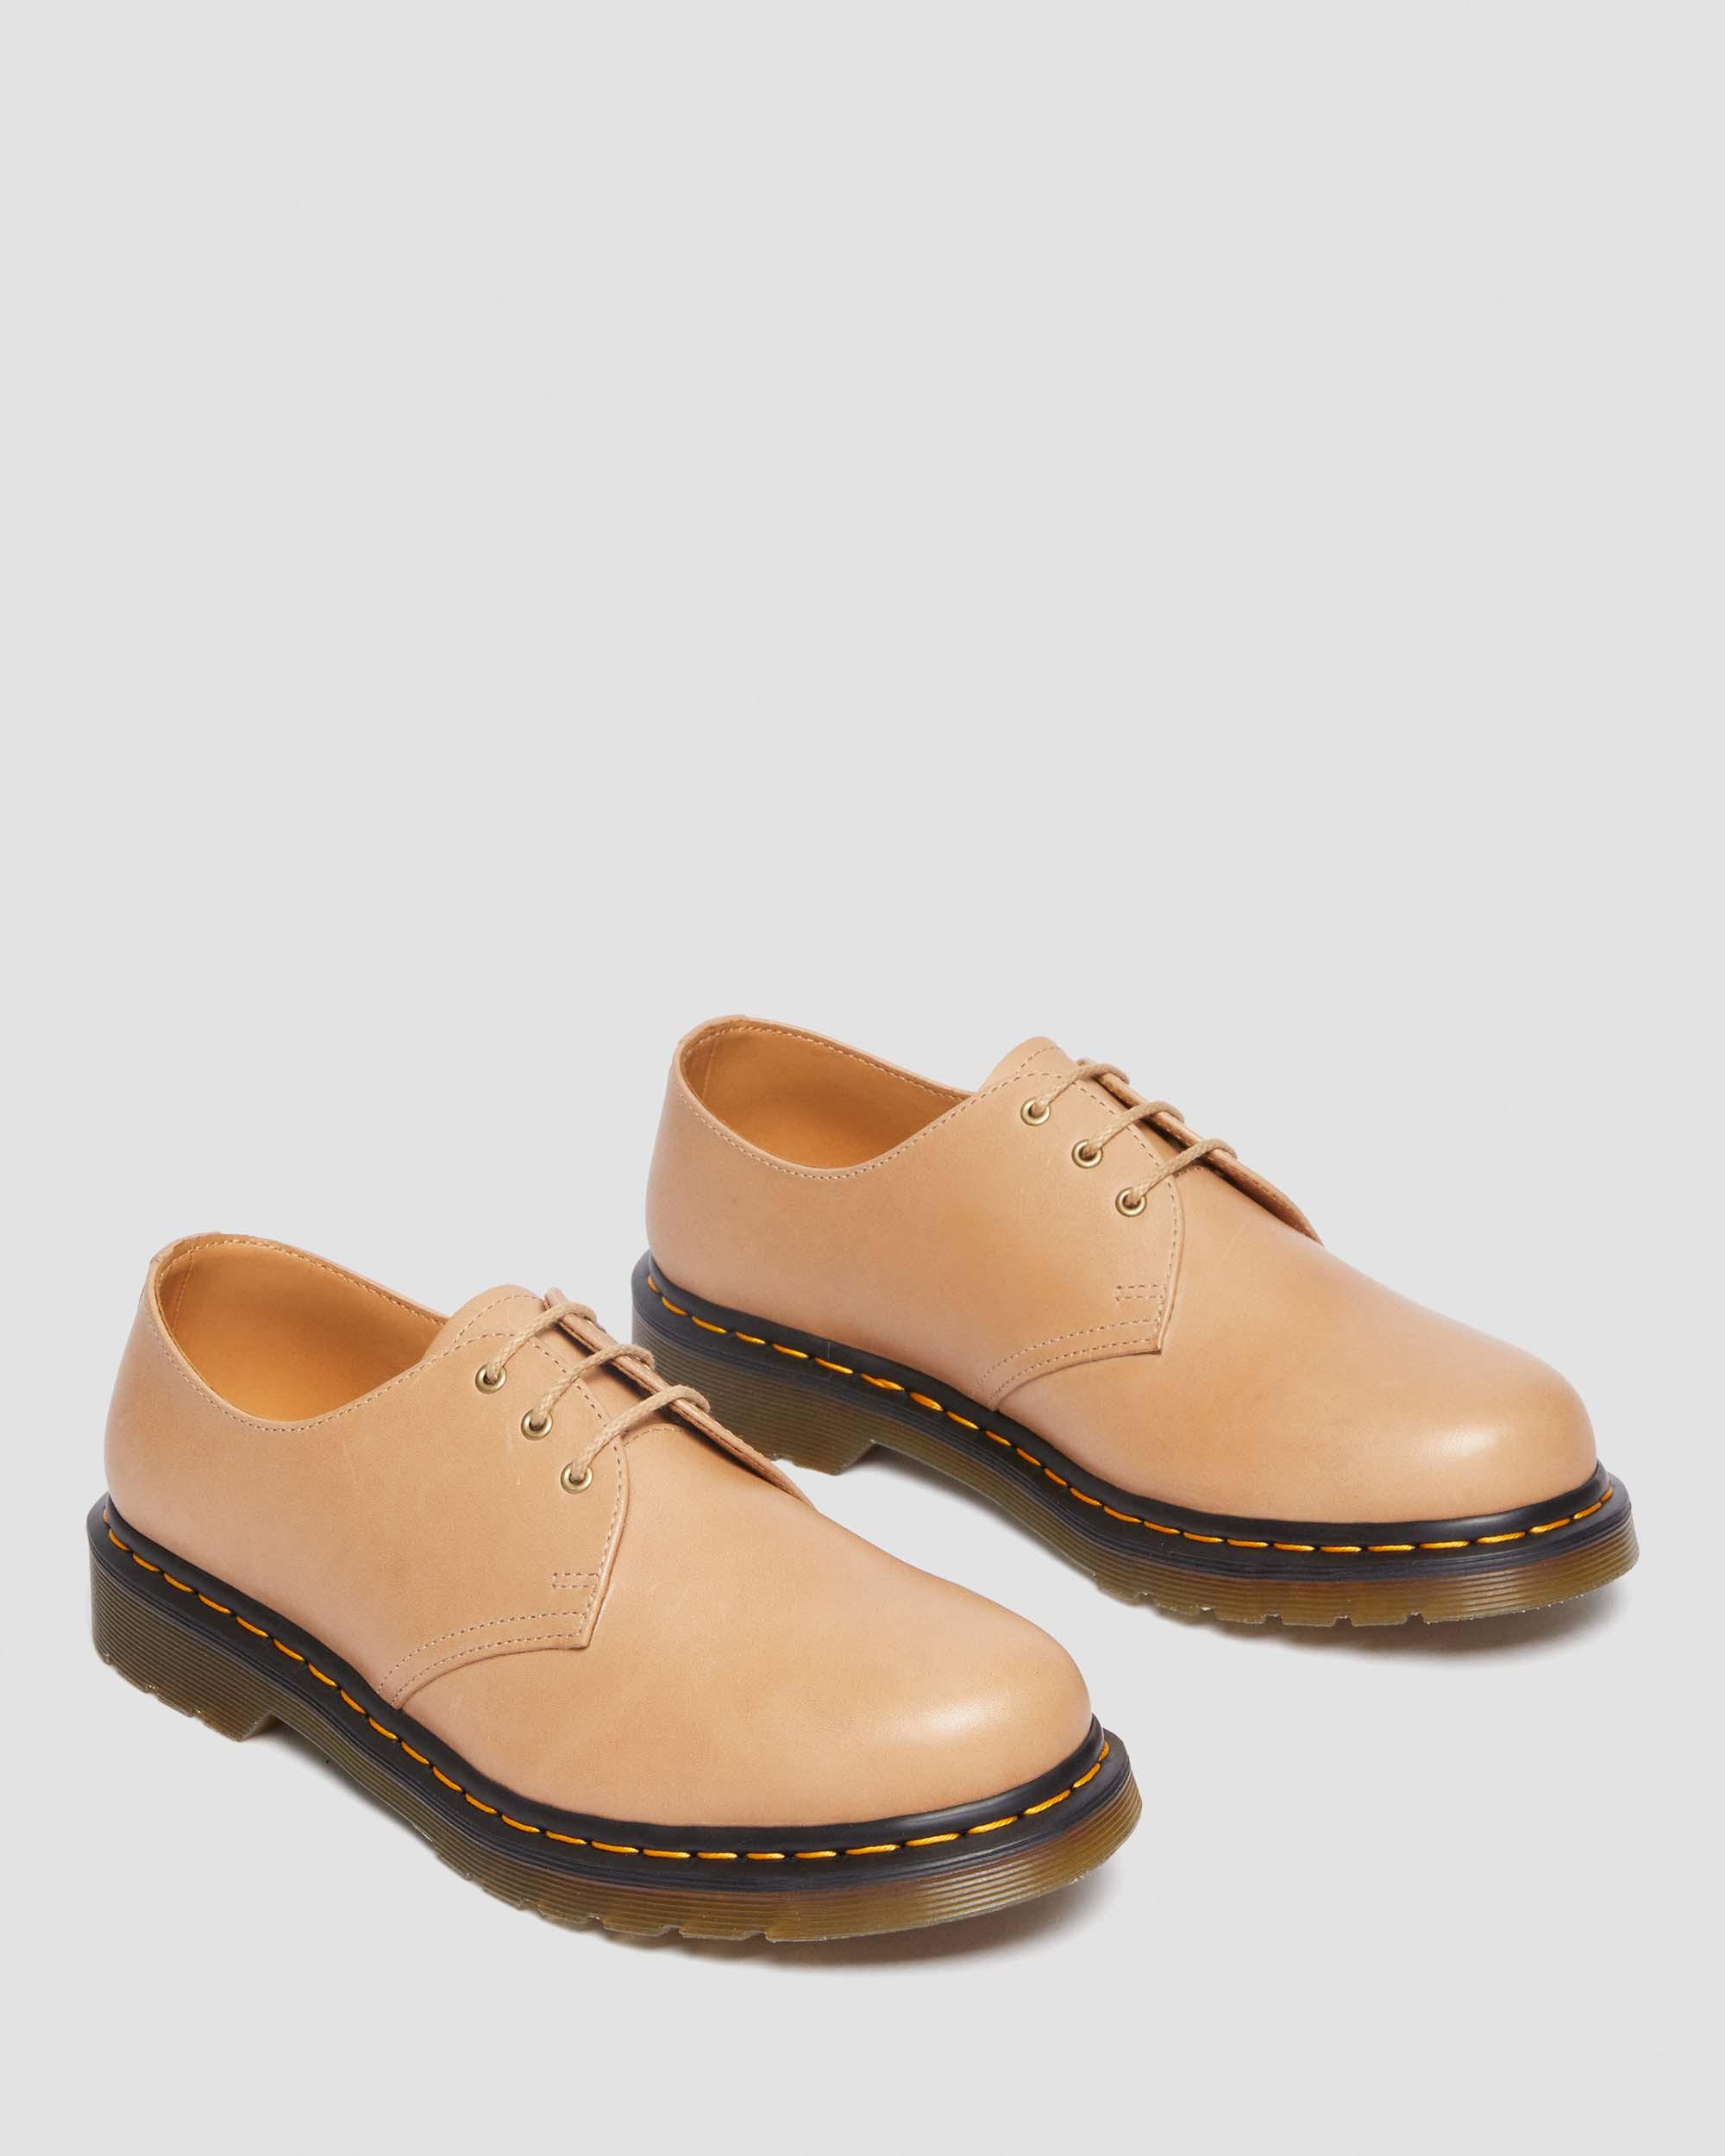 1461 Carrara Leather Oxford Shoes in Beige